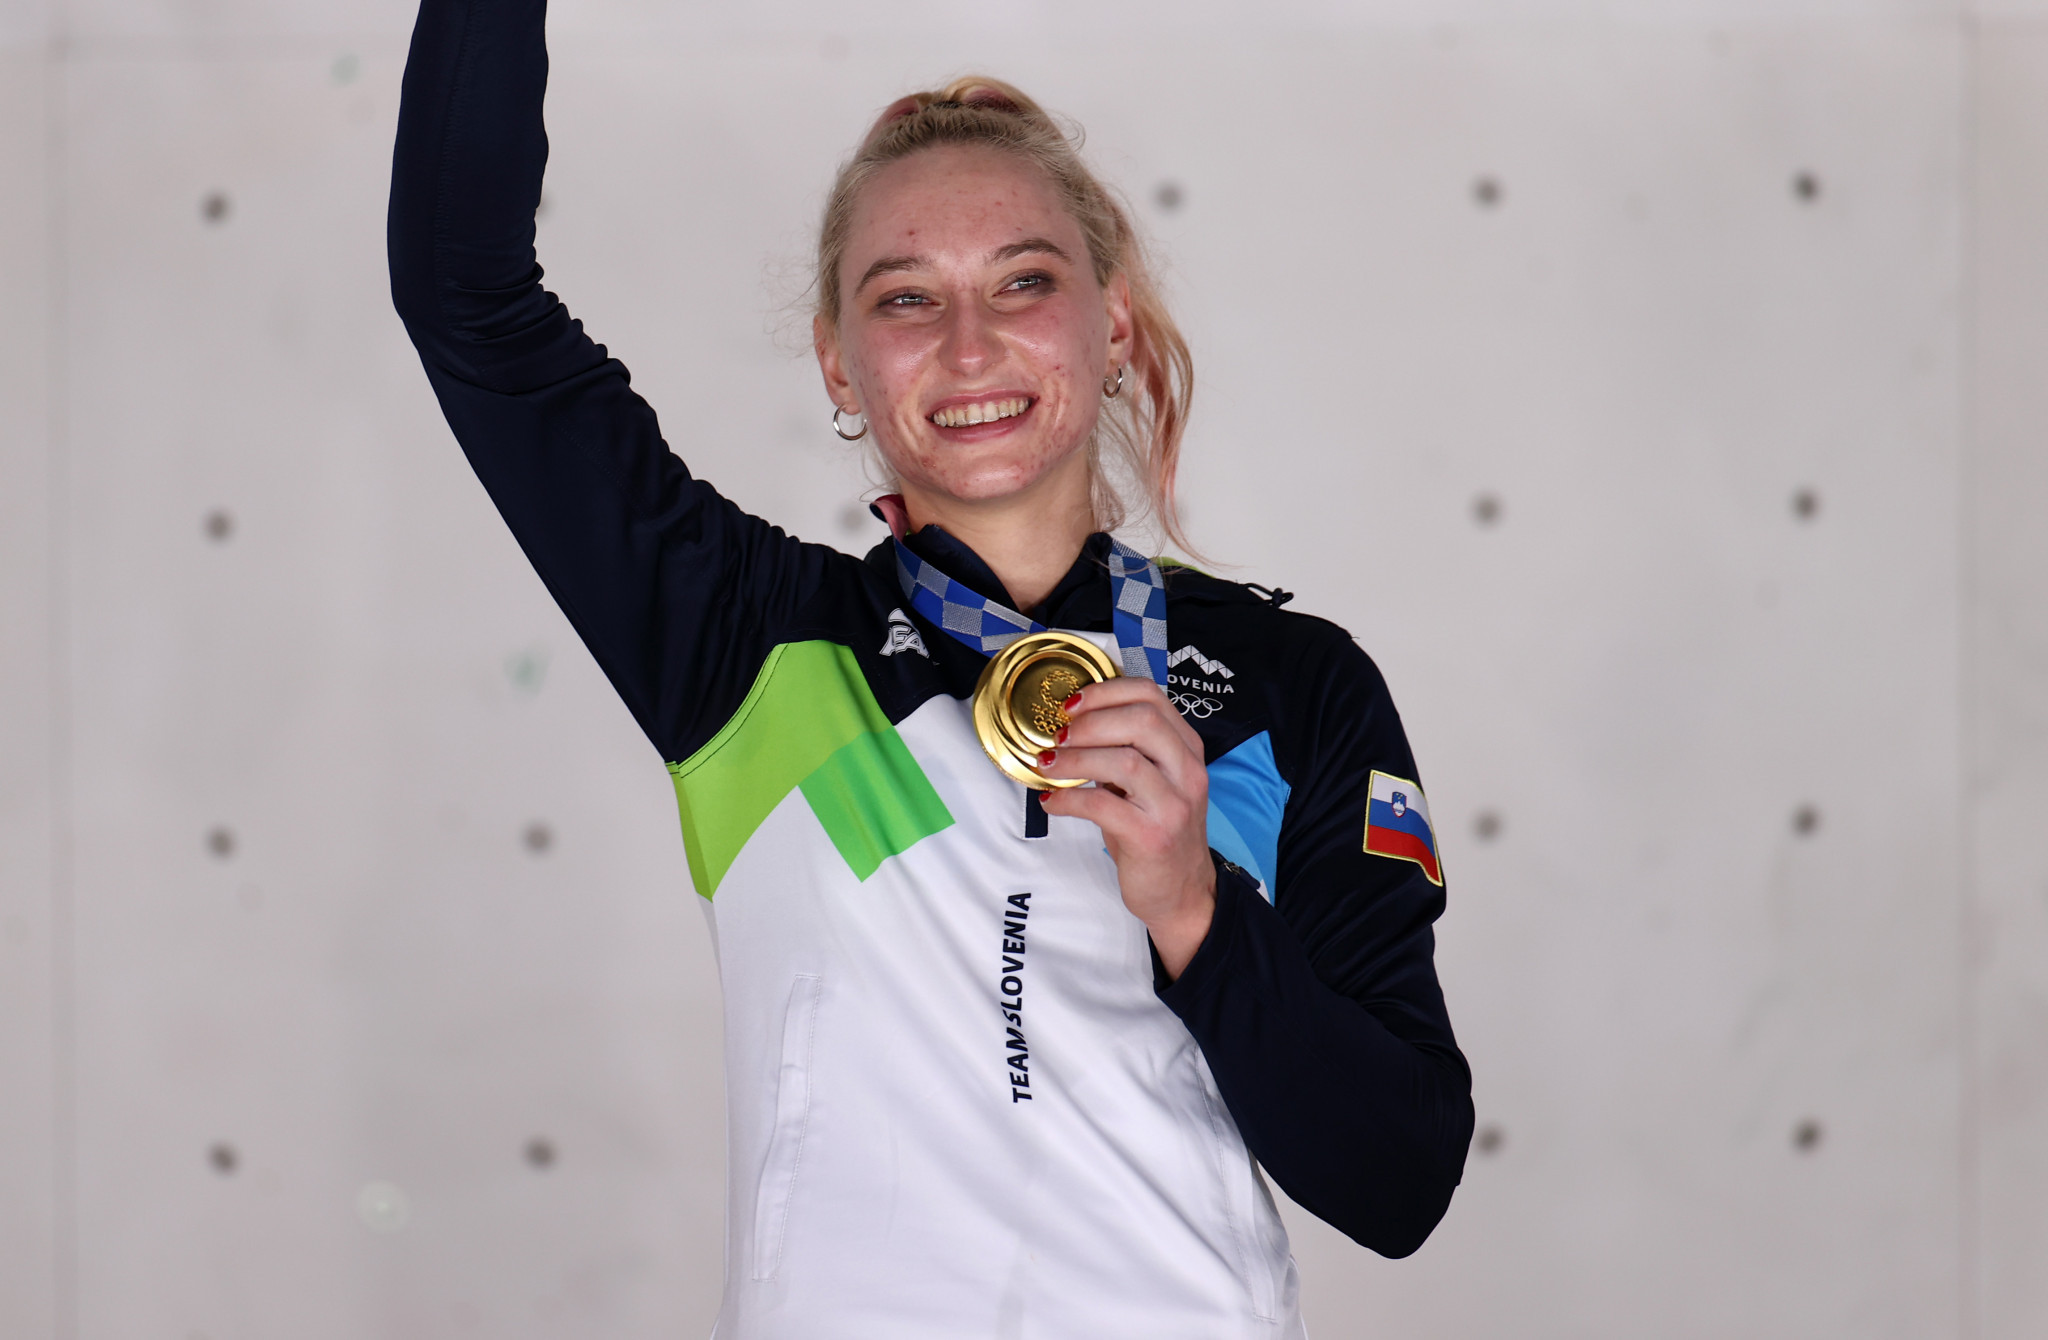 Slovenia's Janja Garnbret has been voted as the World Games Athlete of the Month after winning the first sports climbing Olympic gold medal at Tokyo 2020 ©Getty Images